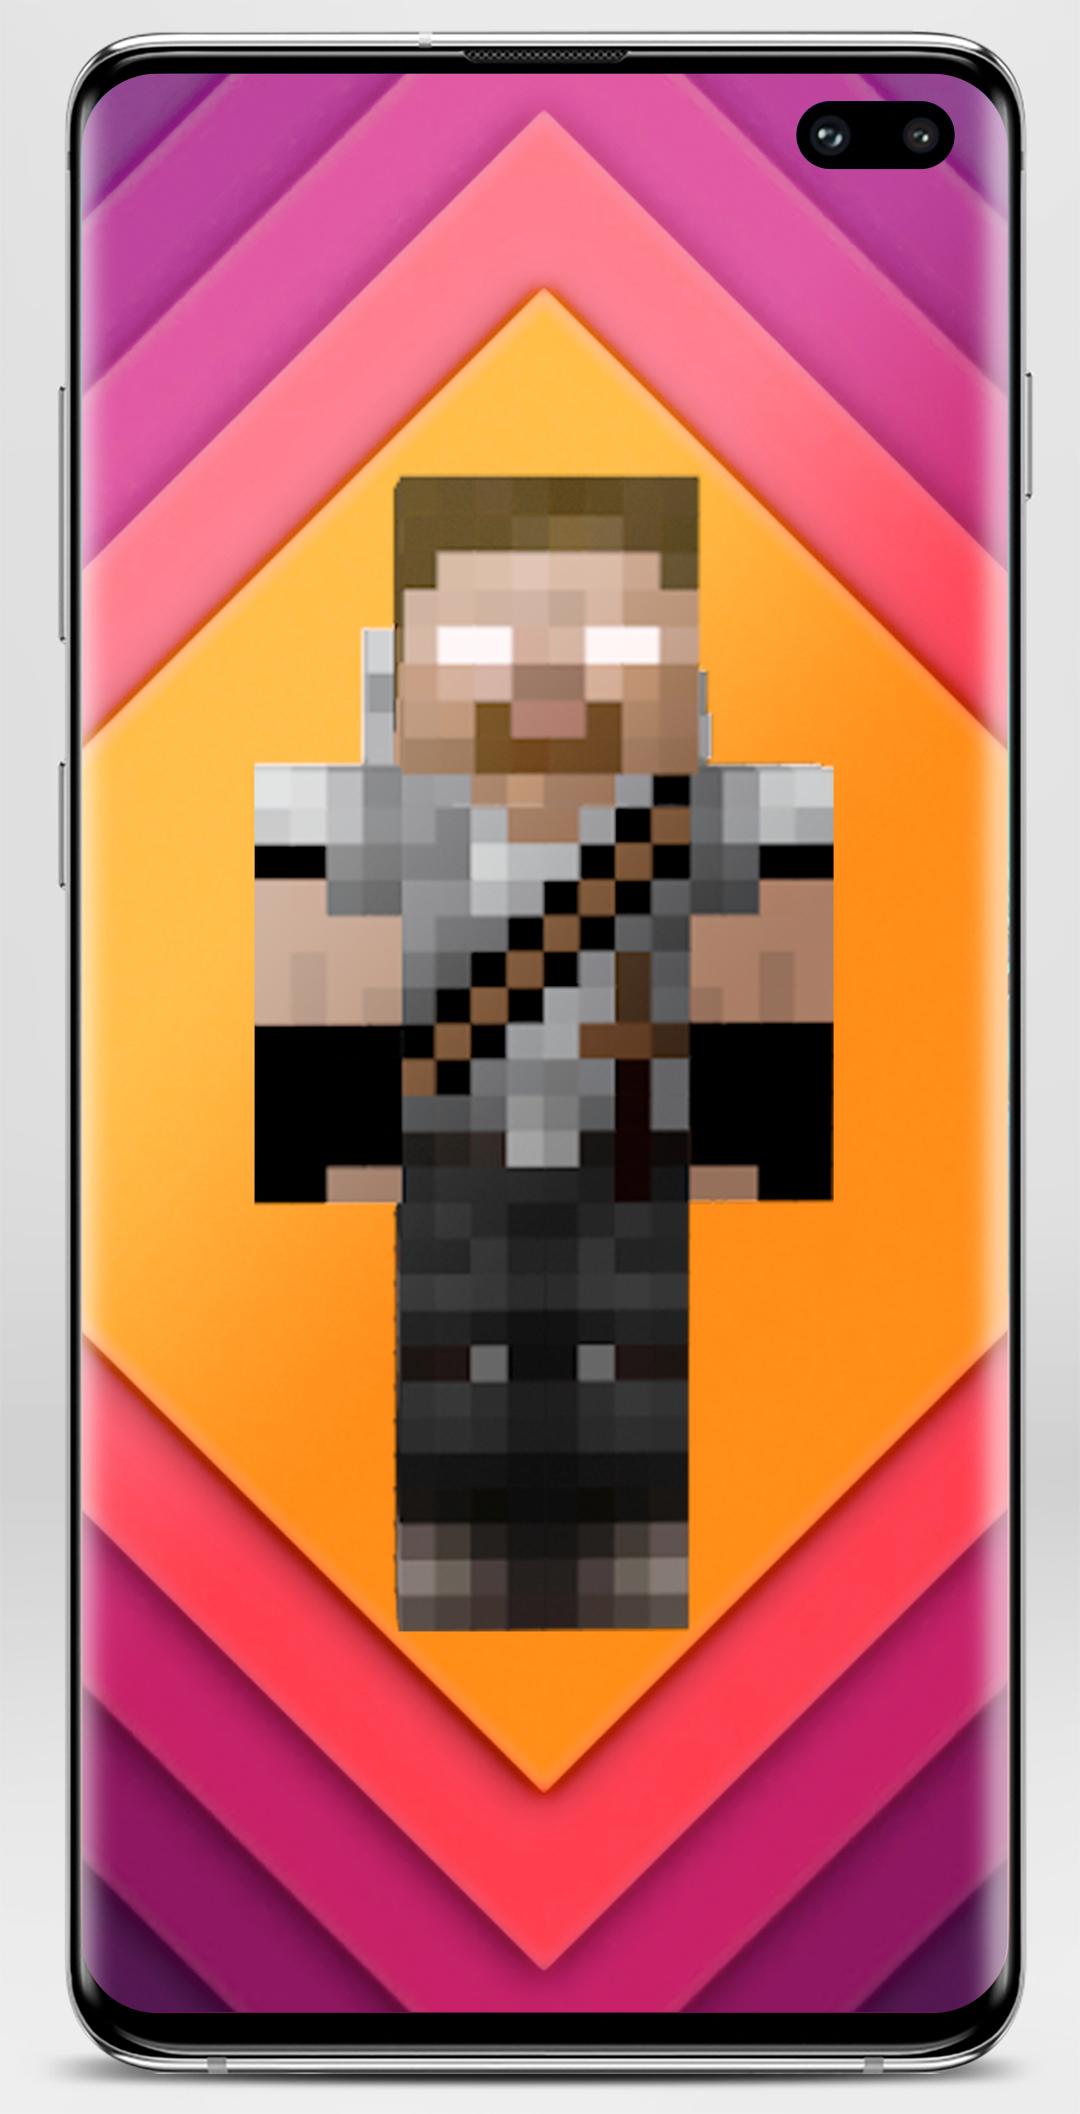 Herobrine Skin For Minecraft for Android - Free App Download